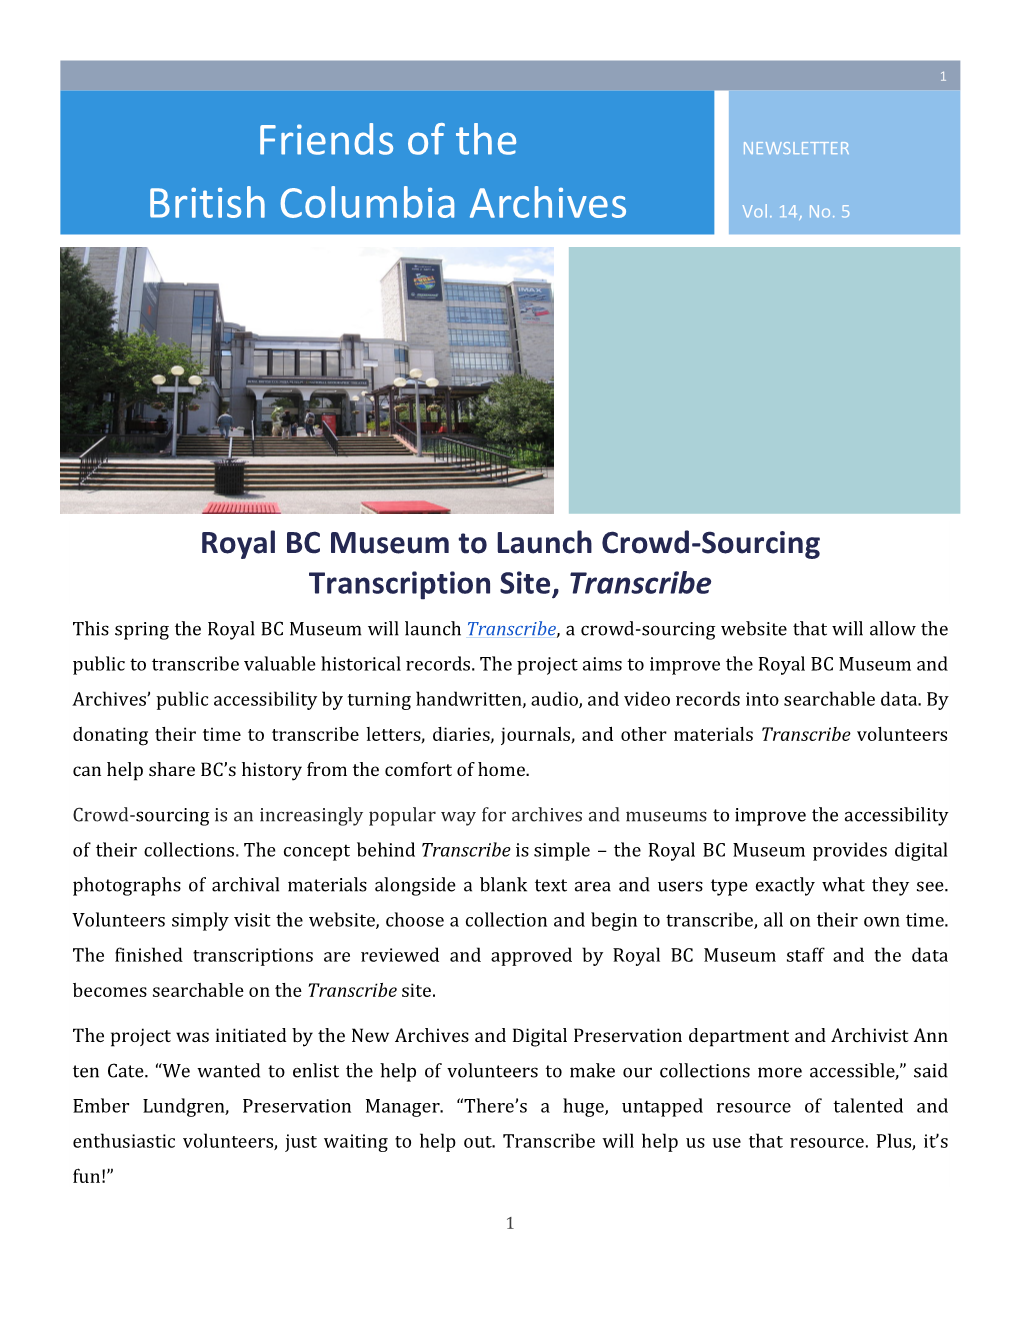 Friends of the British Columbia Archives Is Open to Everyone and Covers the Year from September to August